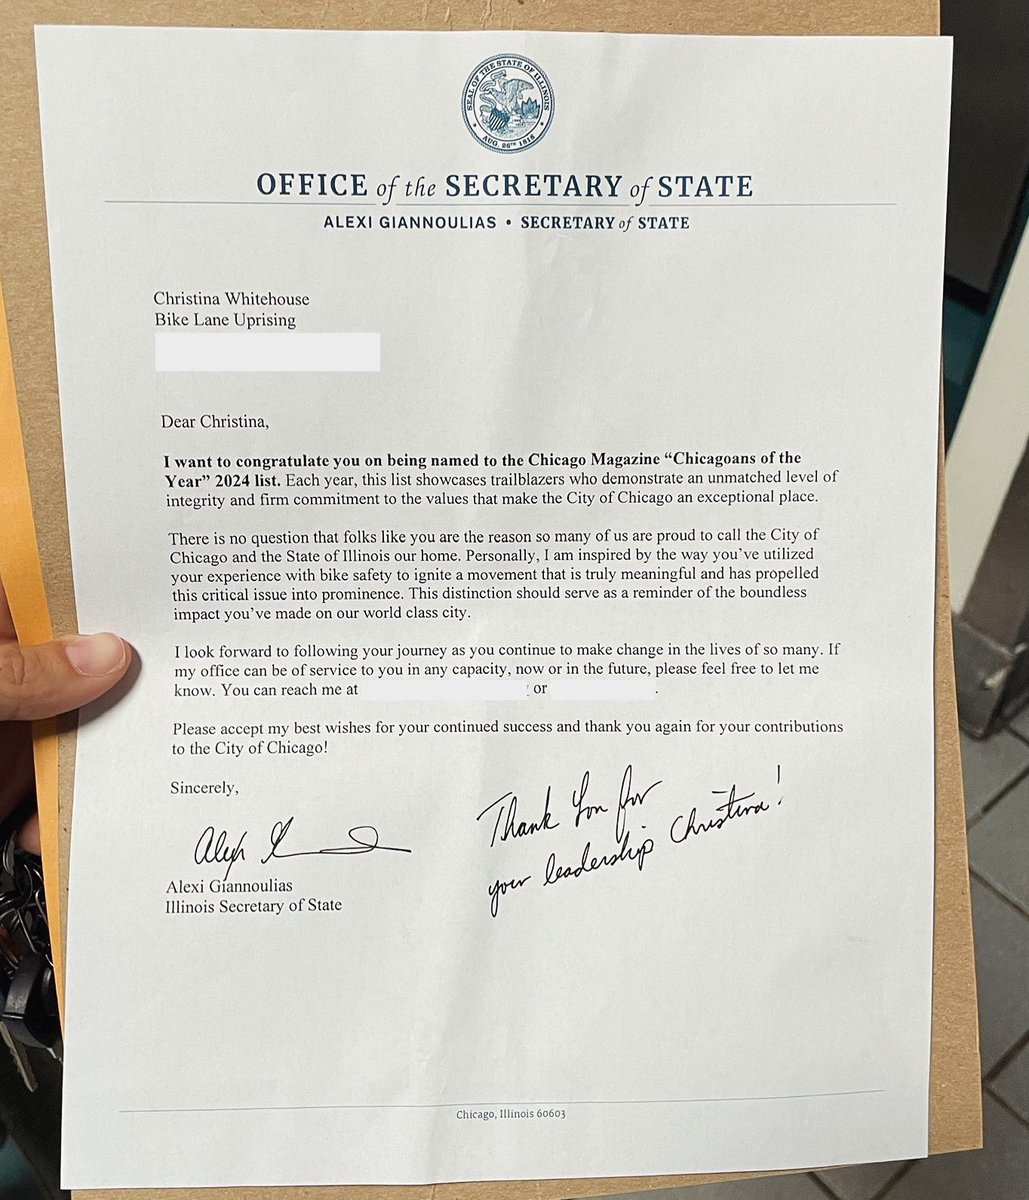 Got a letter from @ILSecOfState today. Our mobile app, database of 70,000 bike lane obstruction, & maps have made this issue something that can’t be ignored. Let’s keep going bike fam - more and more political leaders are paying attention.